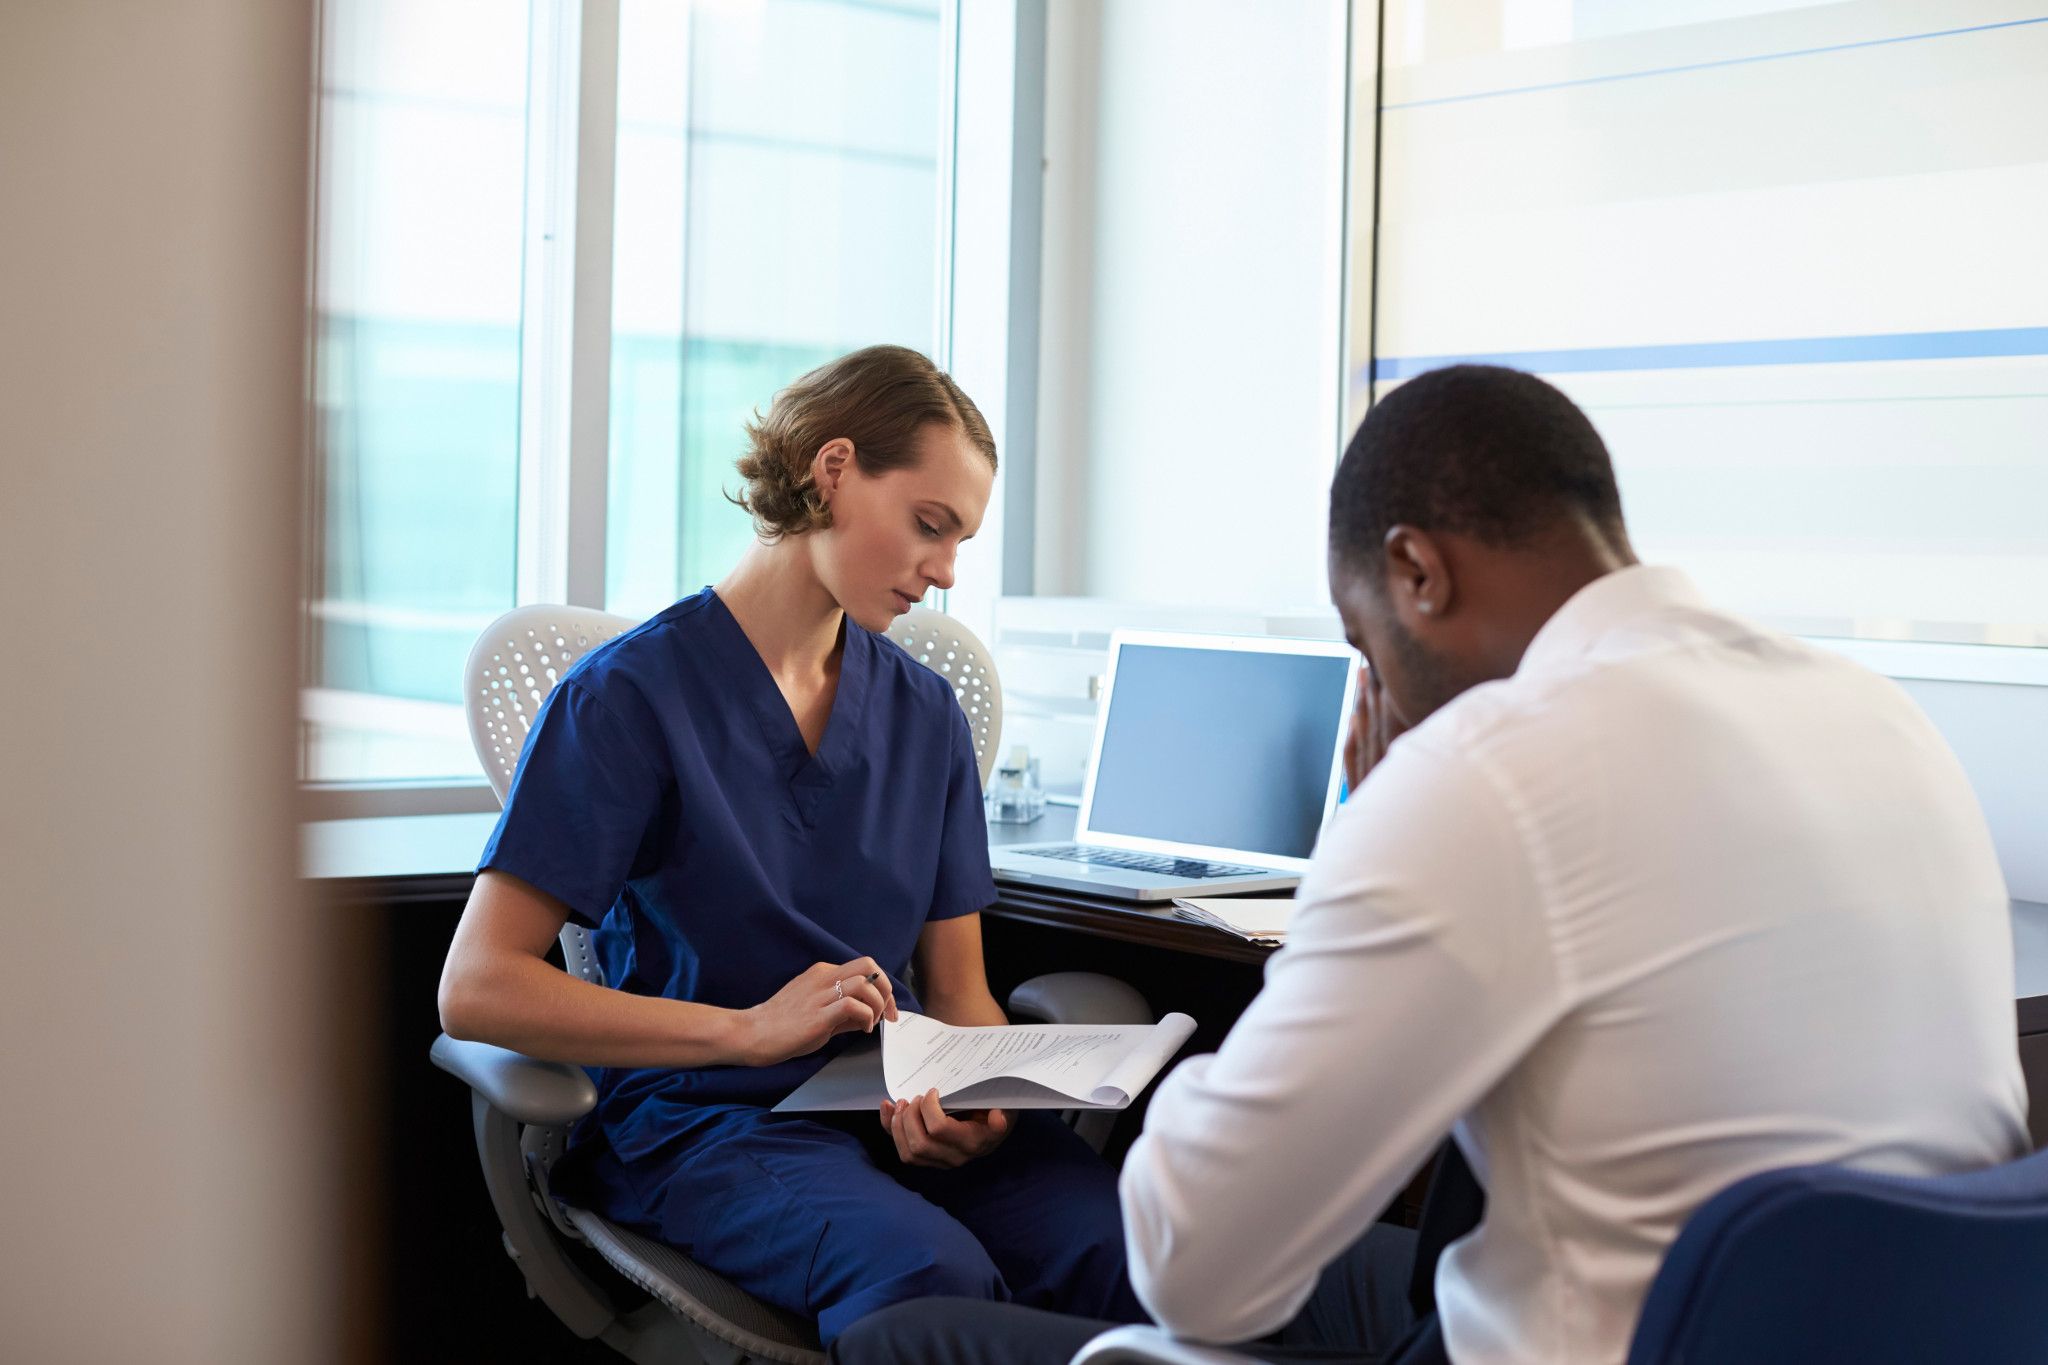 health care professional reviewing records with patient